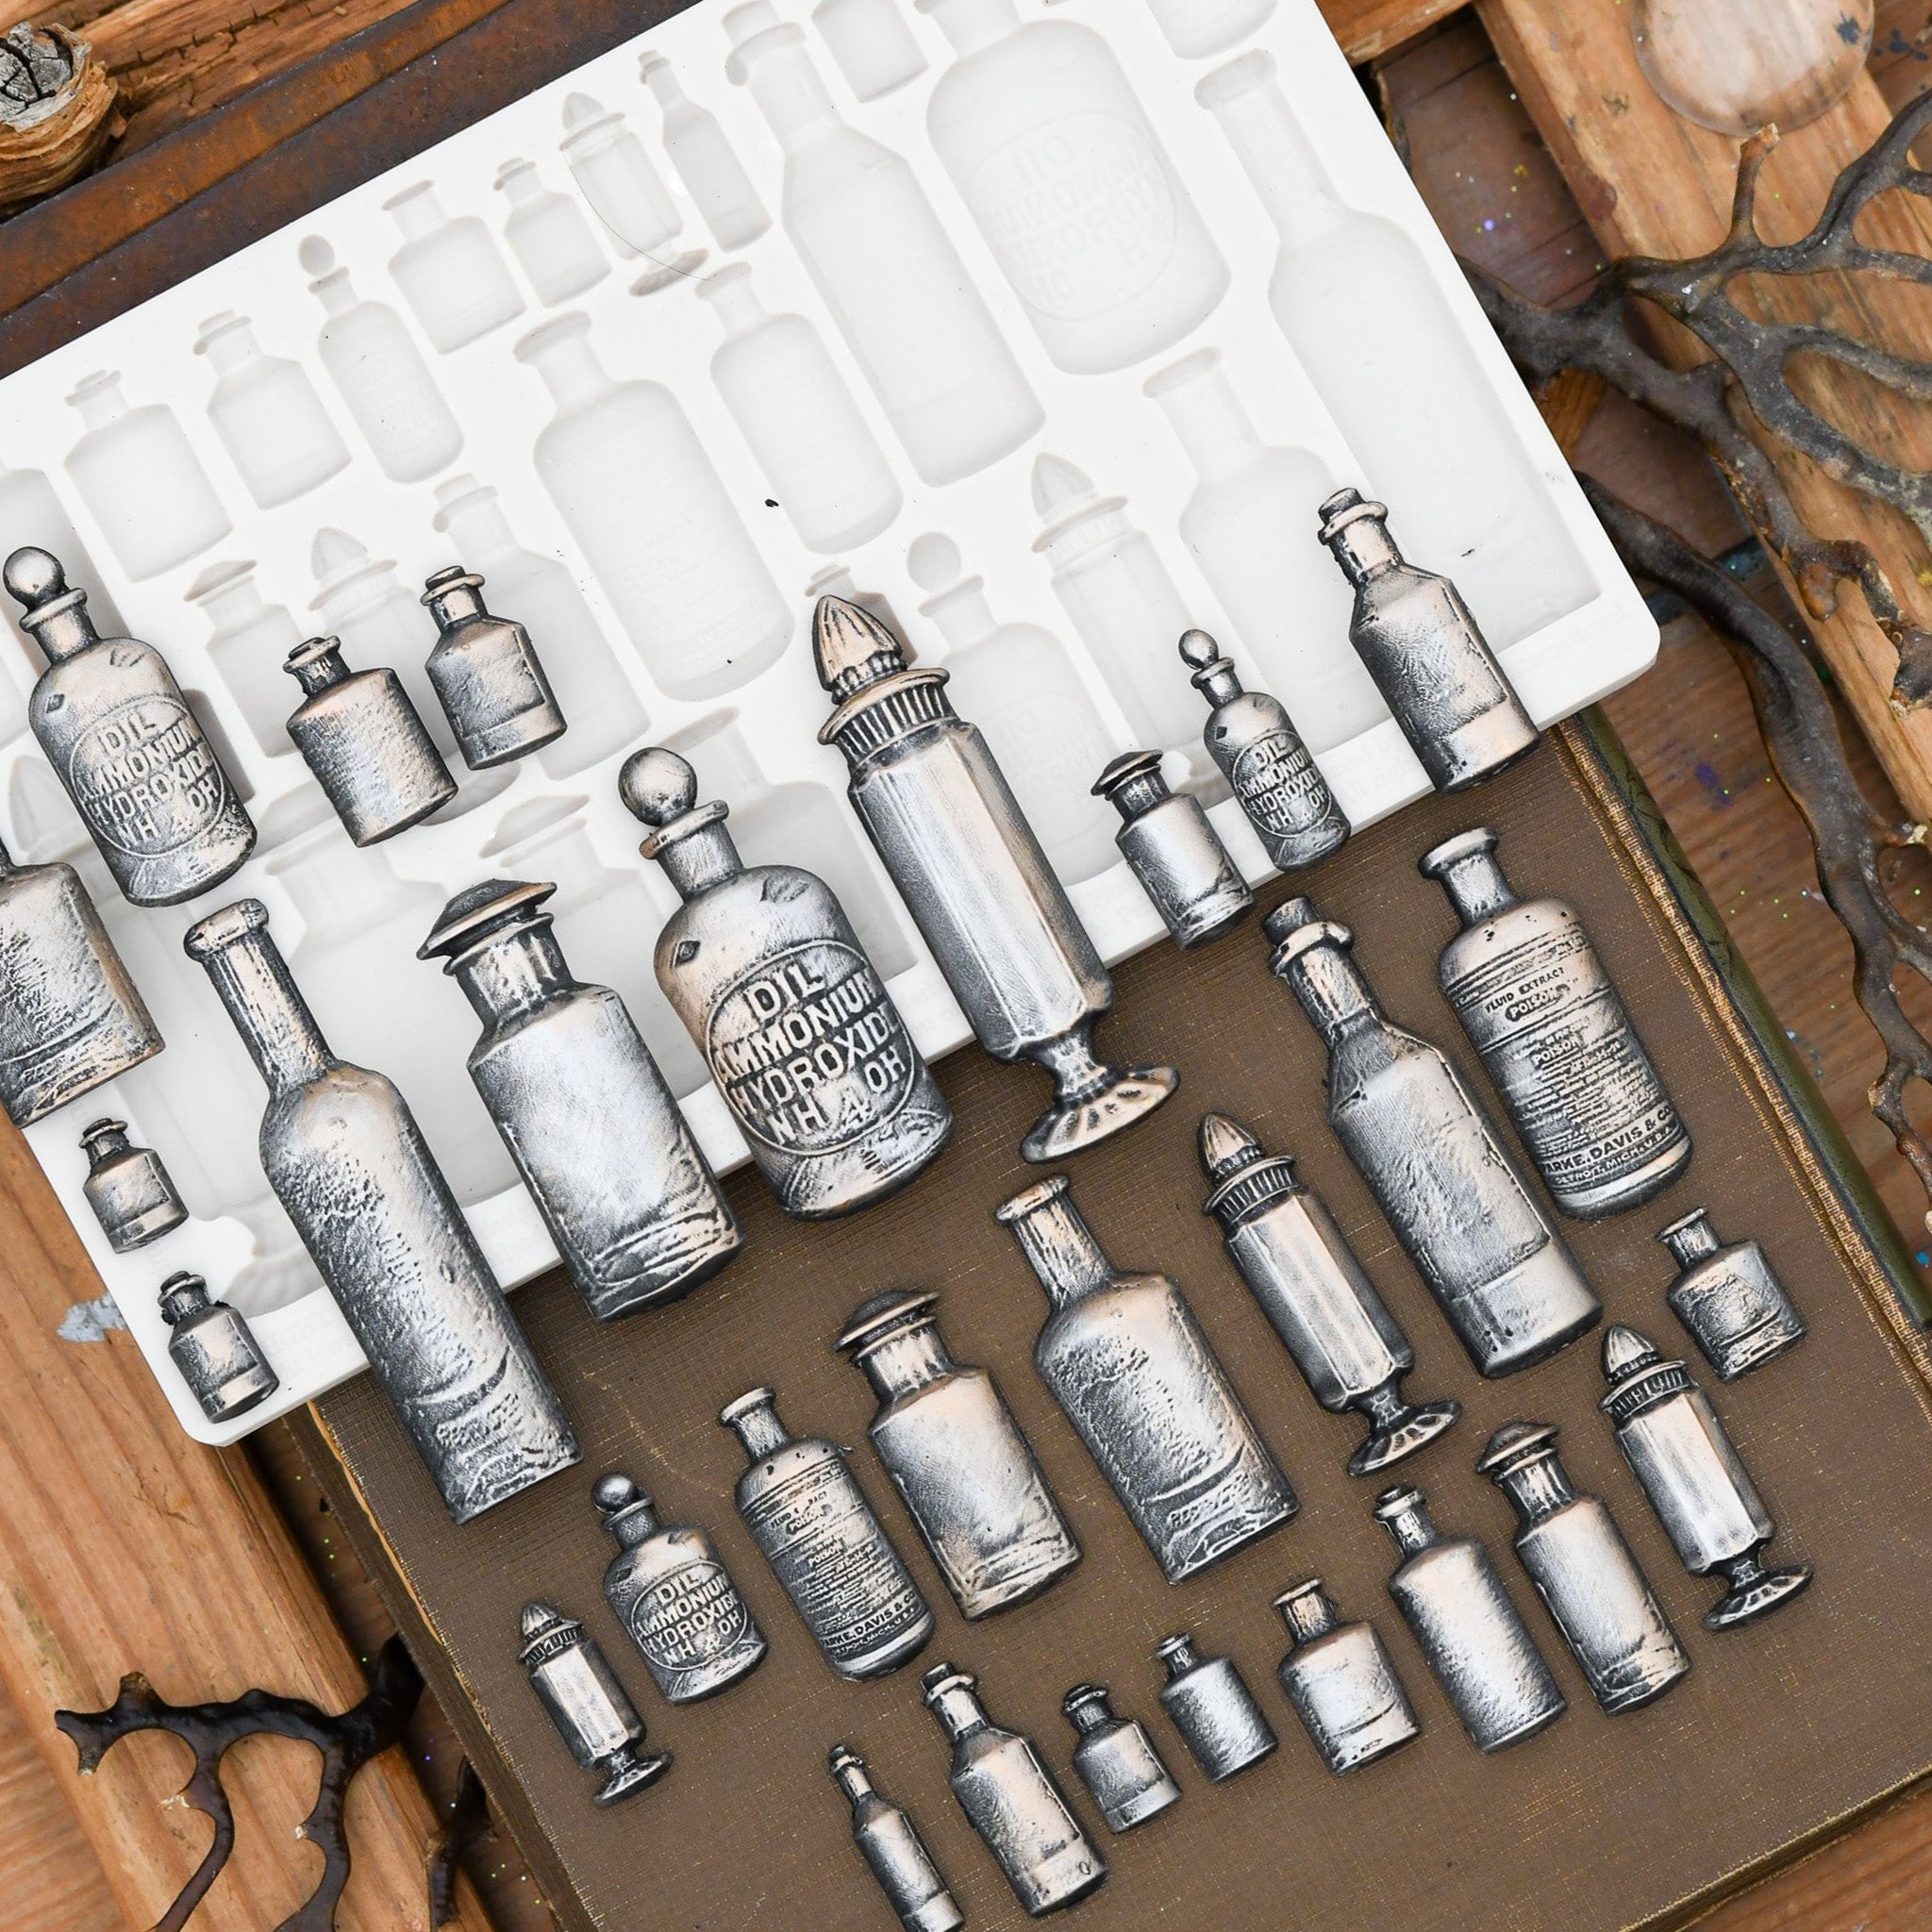 A beige silicone mold and silver-colored castings of 30 varying sizes of apothecary bottles are on top of a brown book against a wood background.